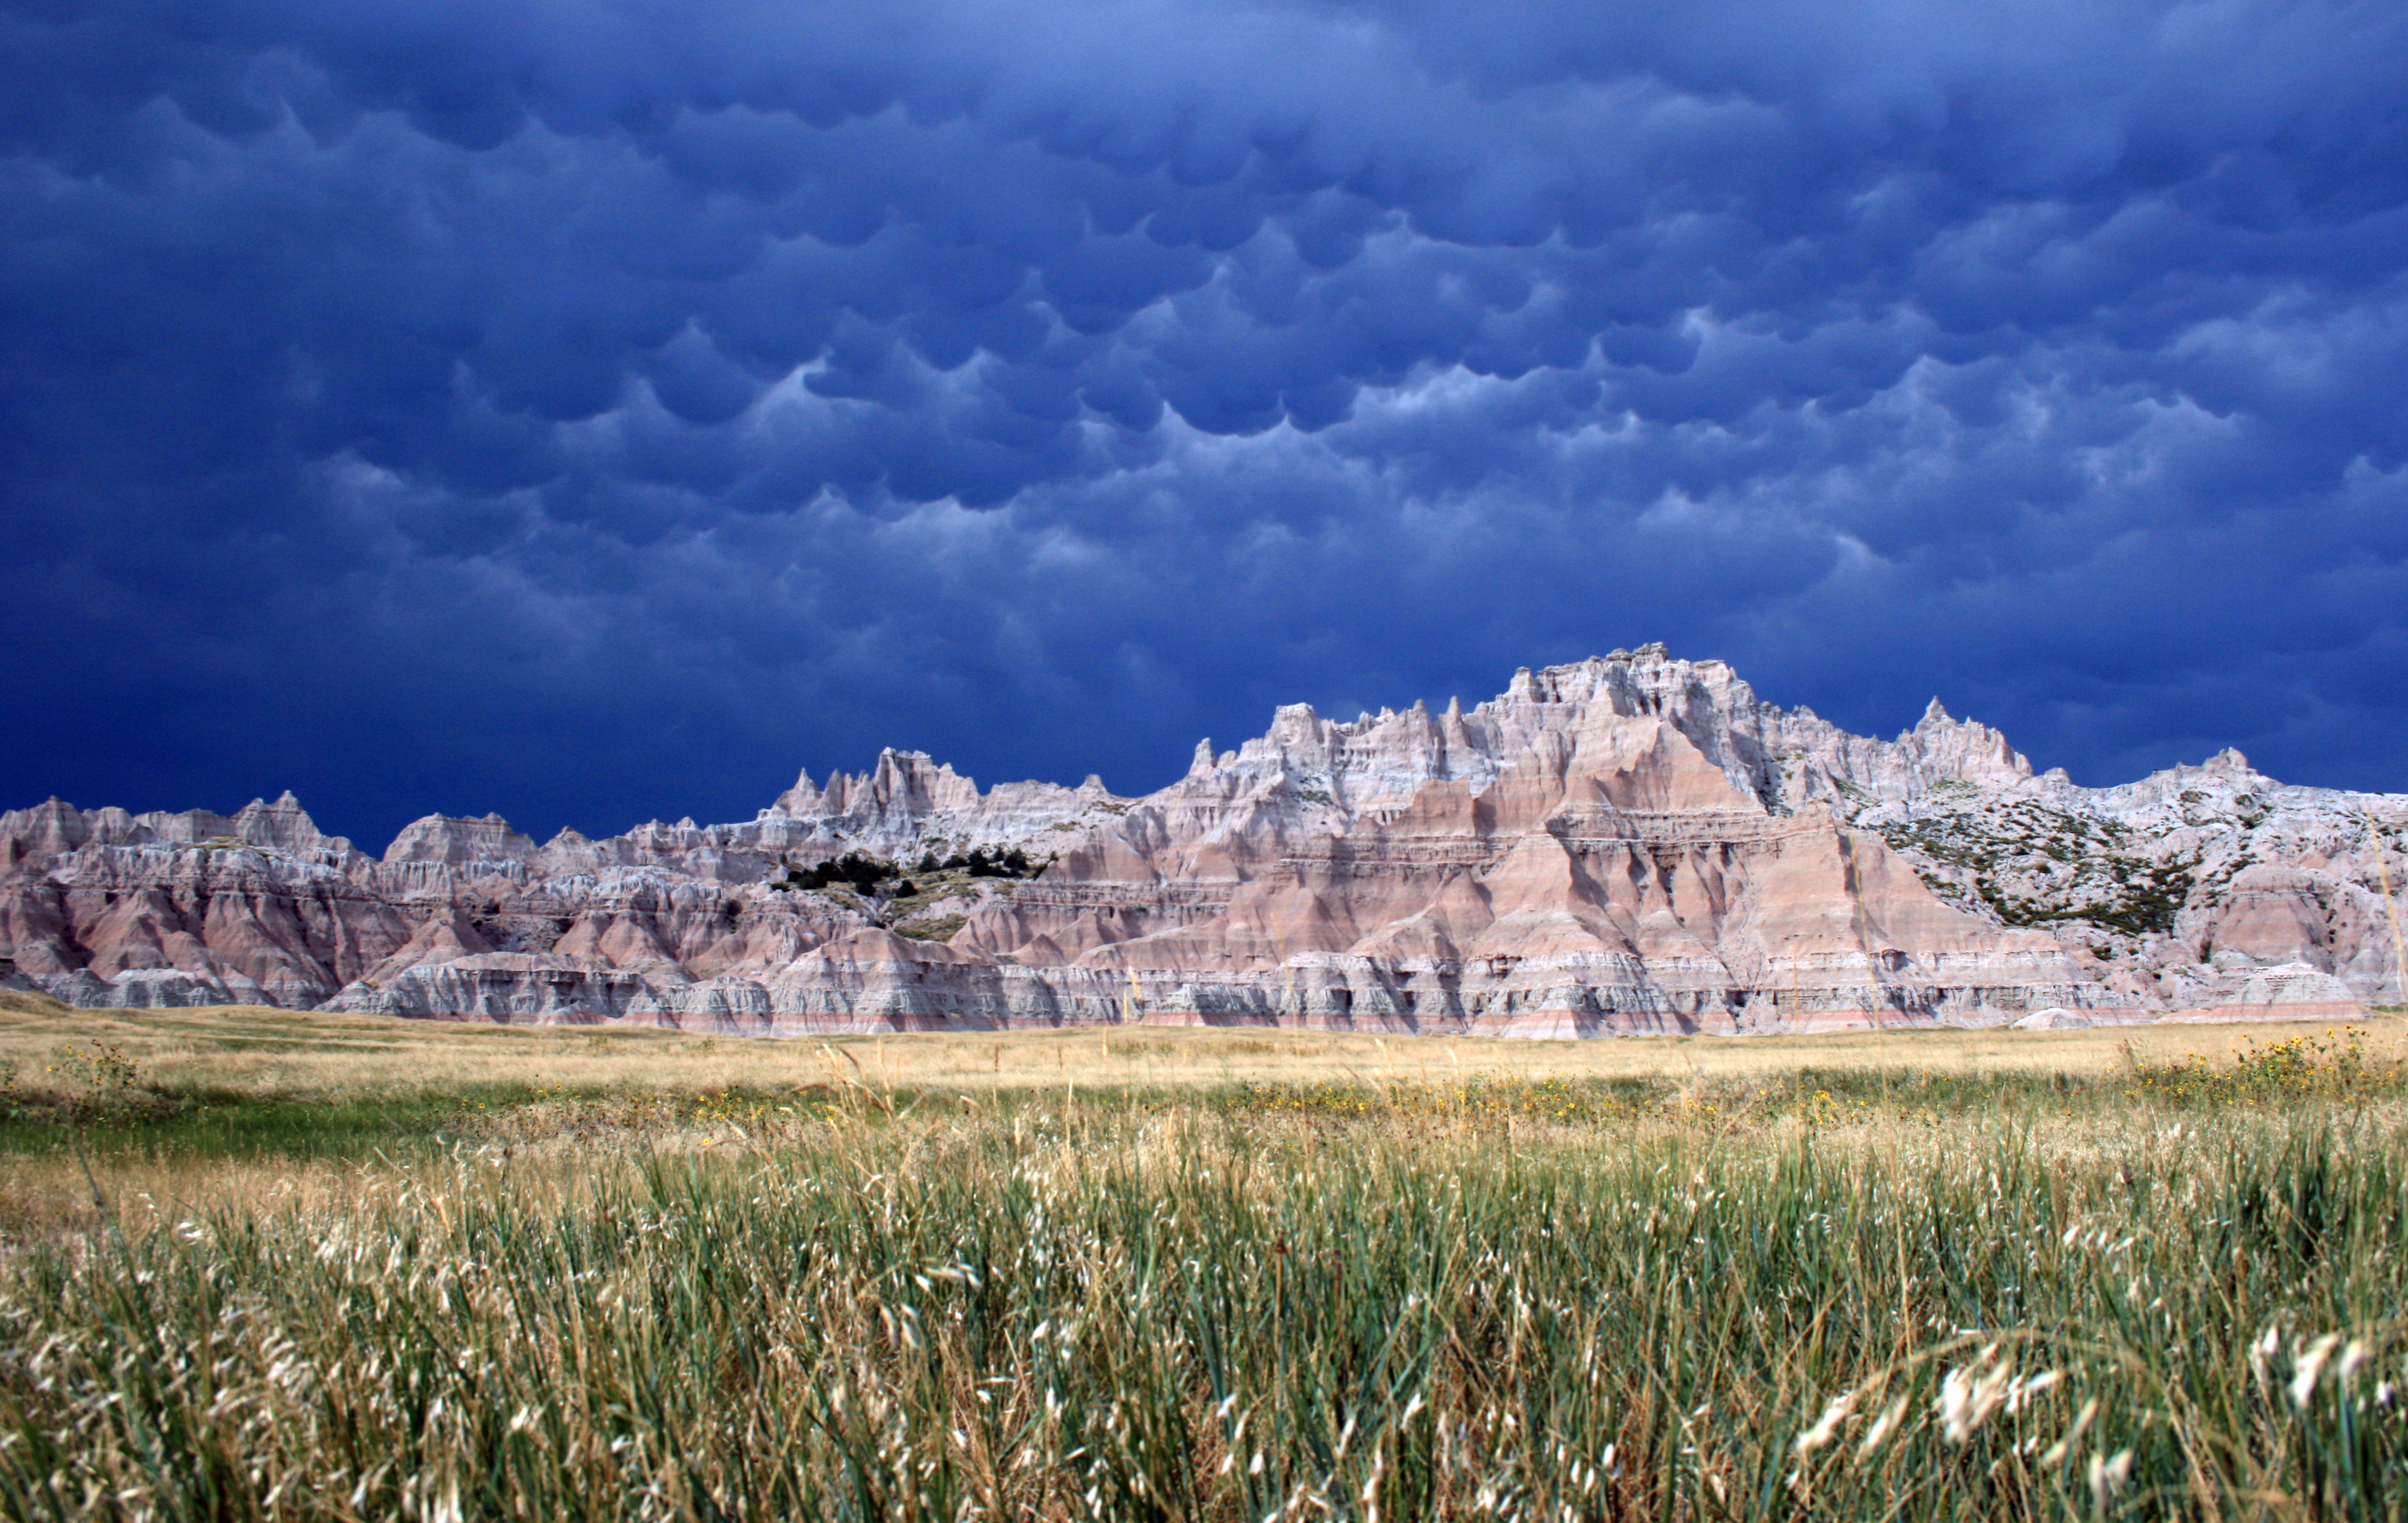 Layered badlands formations behind fields of green grass under cloudy and billowing clouds.